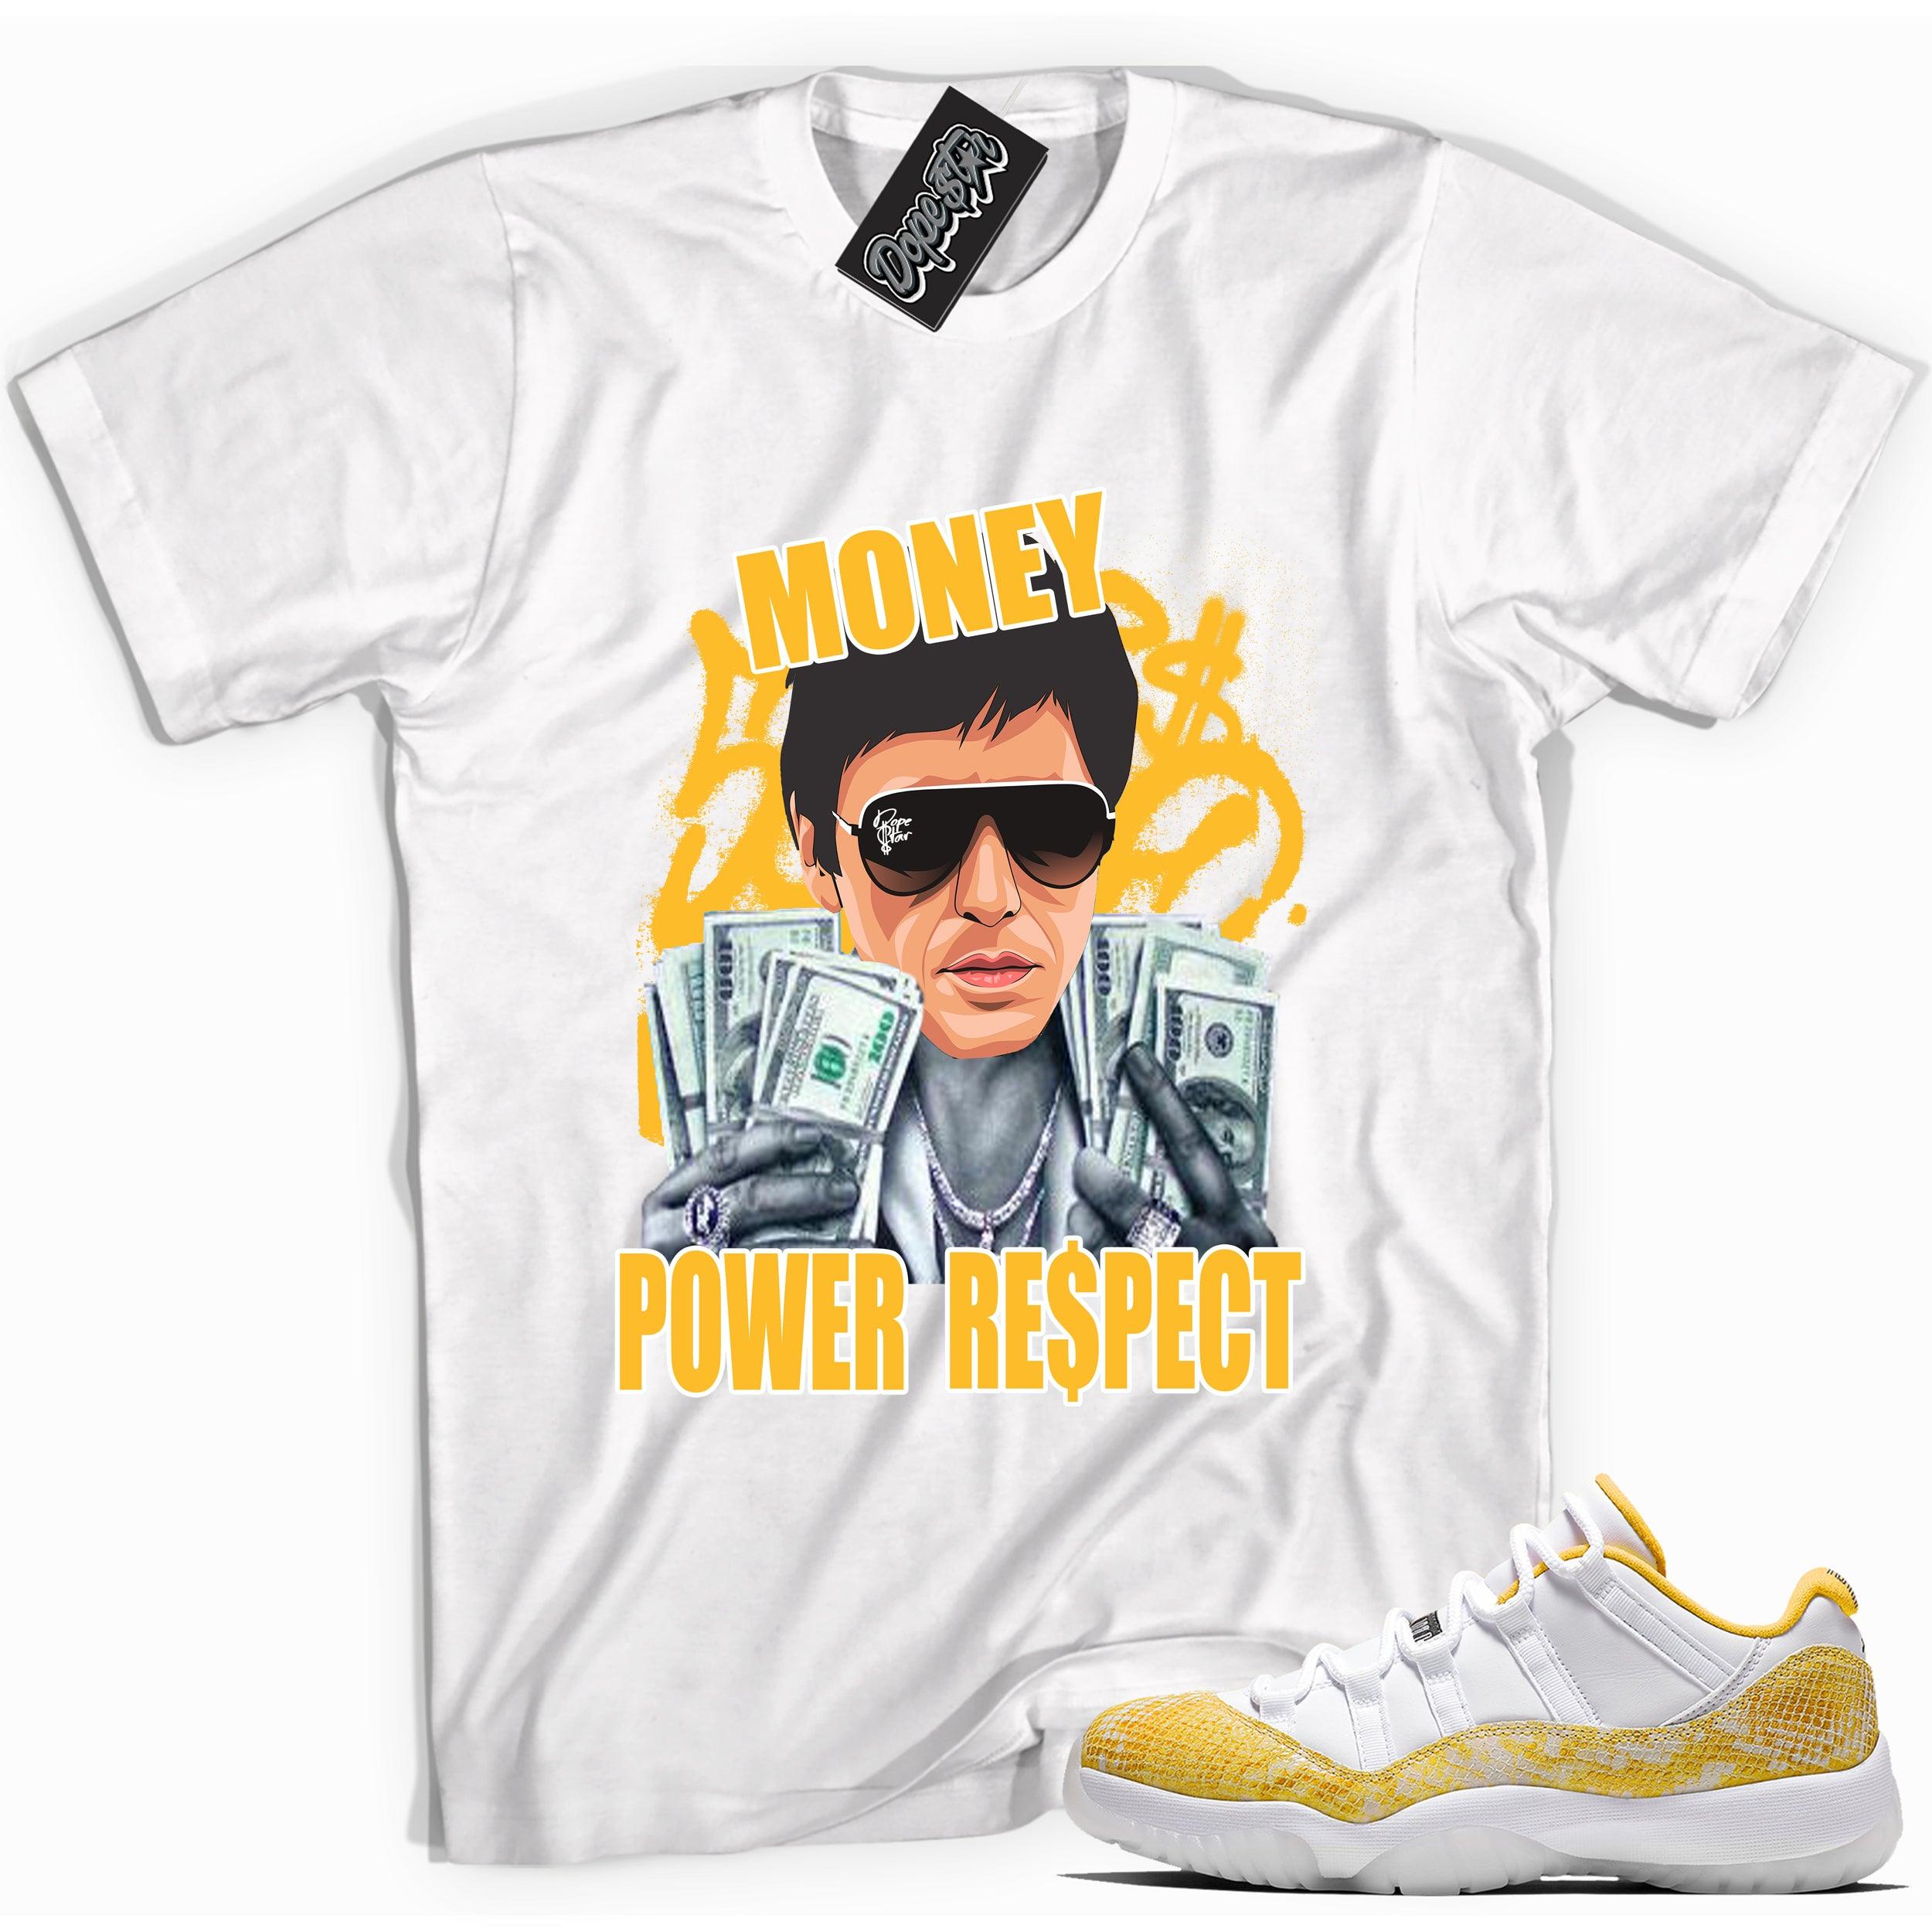 Cool white graphic tee with 'money power respect' print, that perfectly matches Air Jordan 11 Retro Low Yellow Snakeskin sneakers